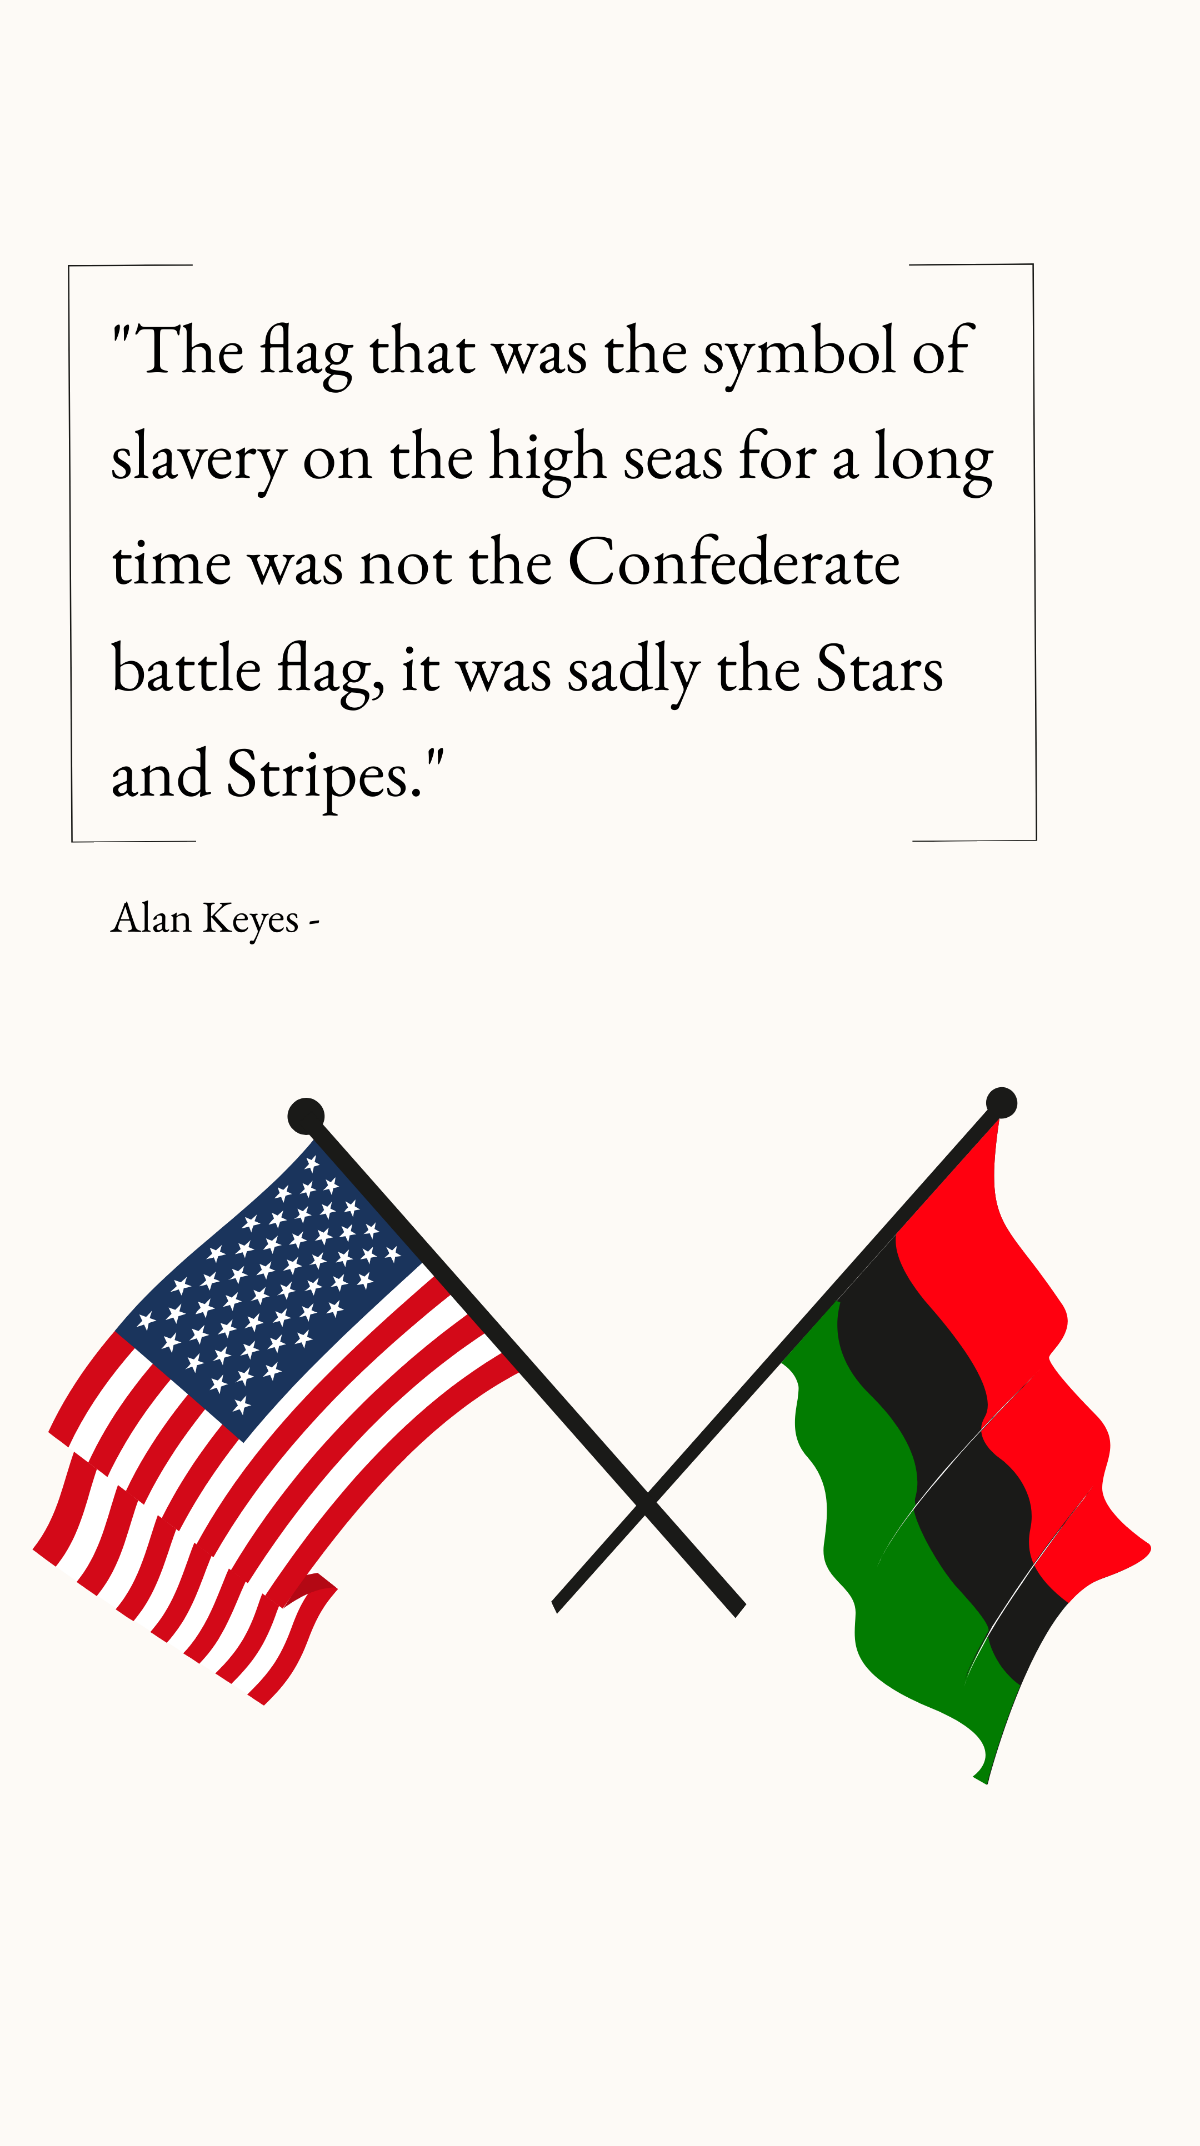 Alan Keyes - The flag that was the symbol of slavery on the high seas for a long time was not the Confederate battle flag, it was sadly the Stars and Stripes. Template